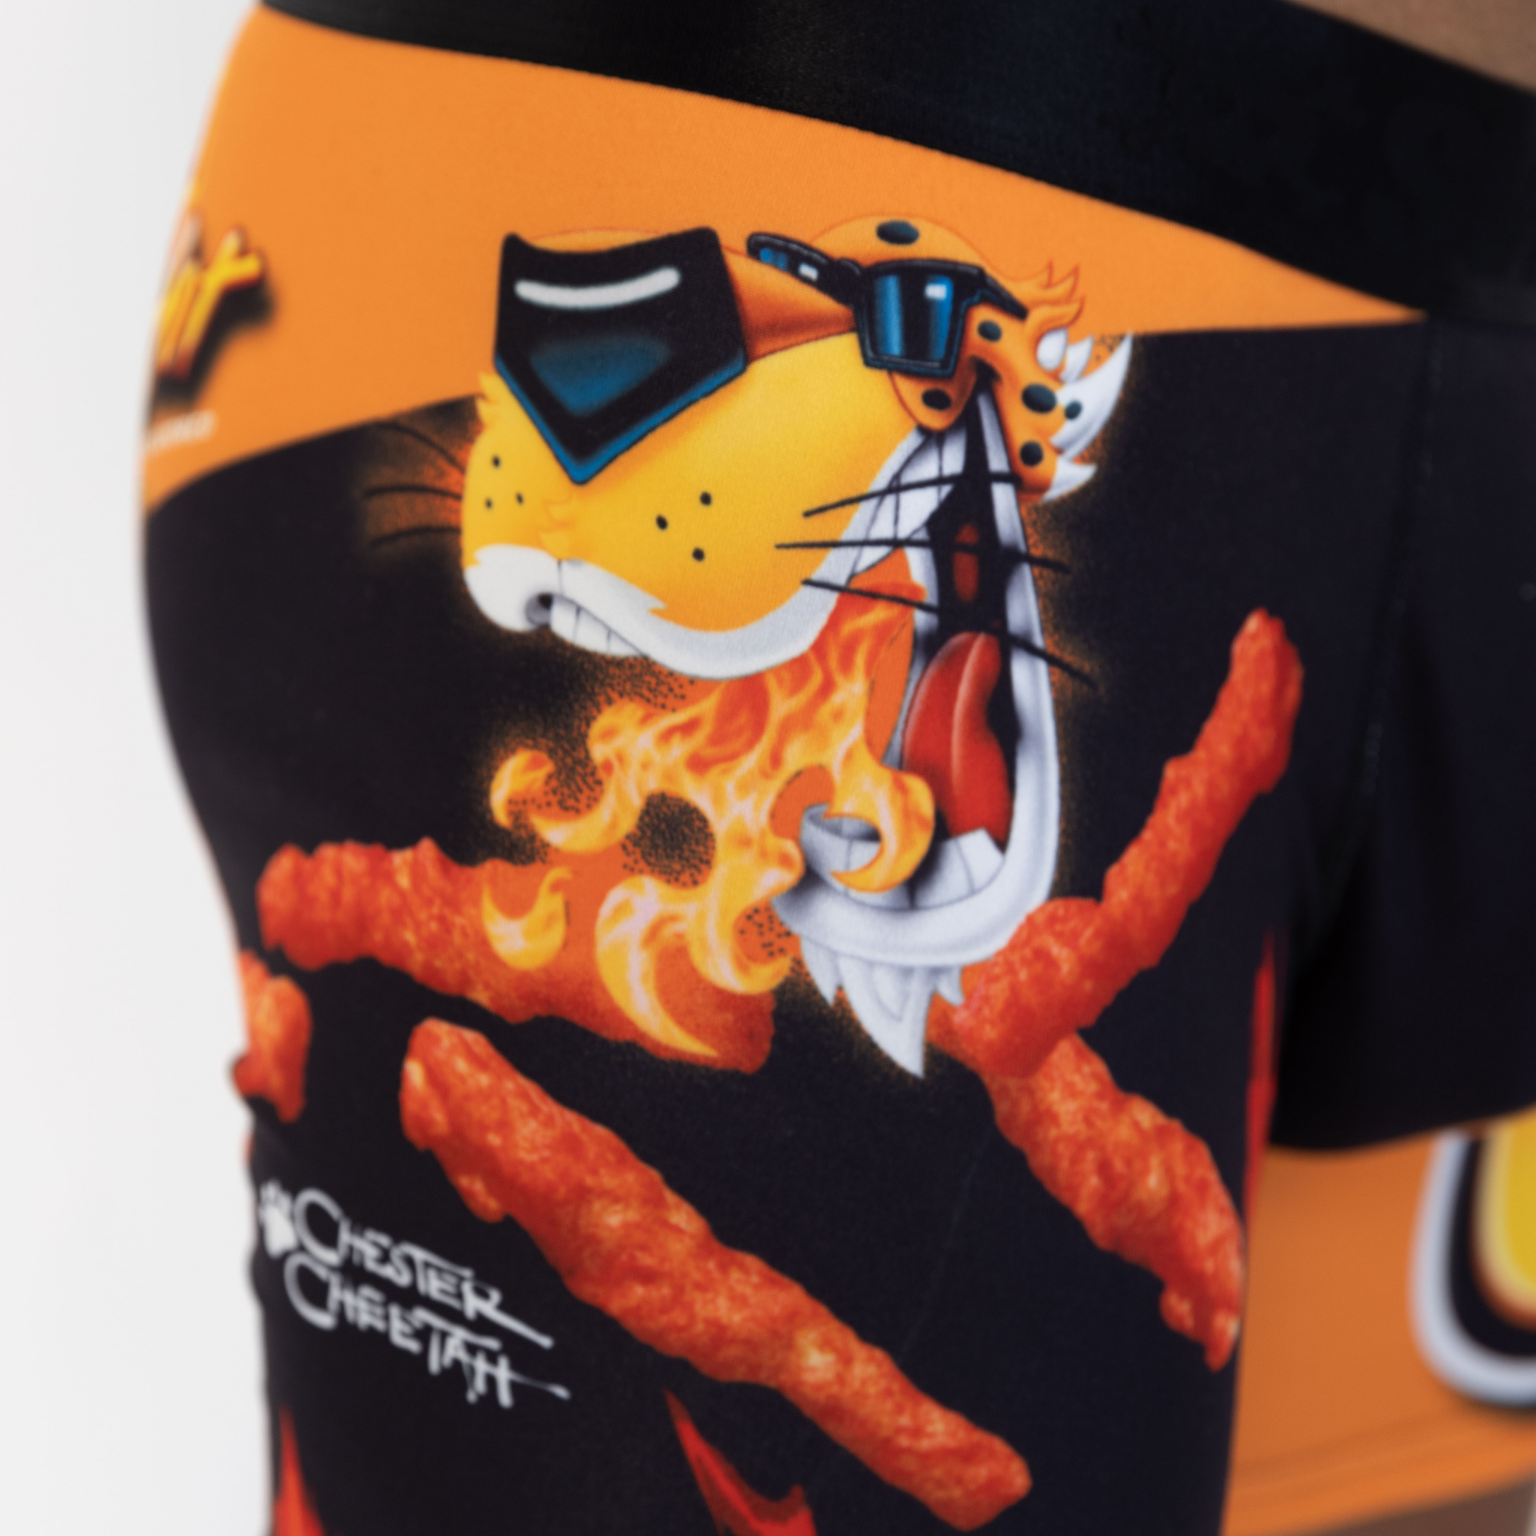 SWAG GROCERY AISLE BOXERS - CHEETOS XXTRA FLAMIN' HOT